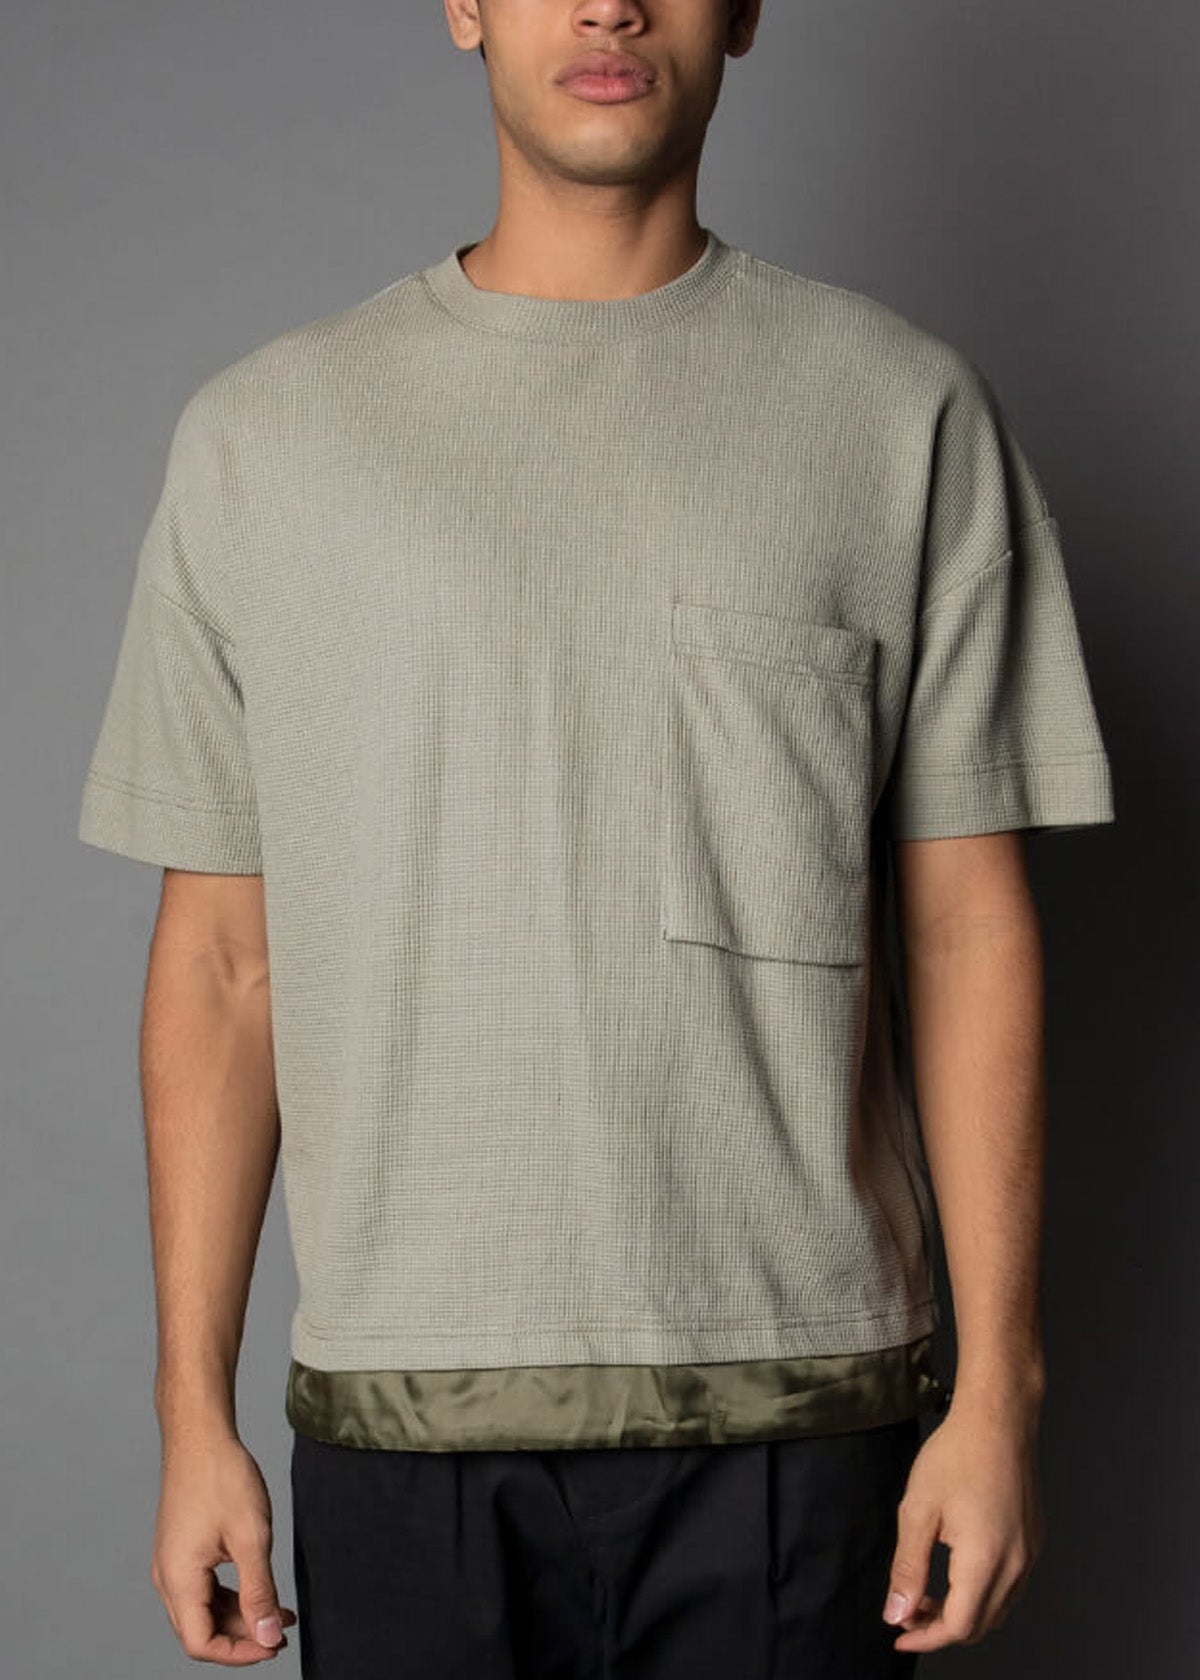 men's mid-weight tee in a sage color